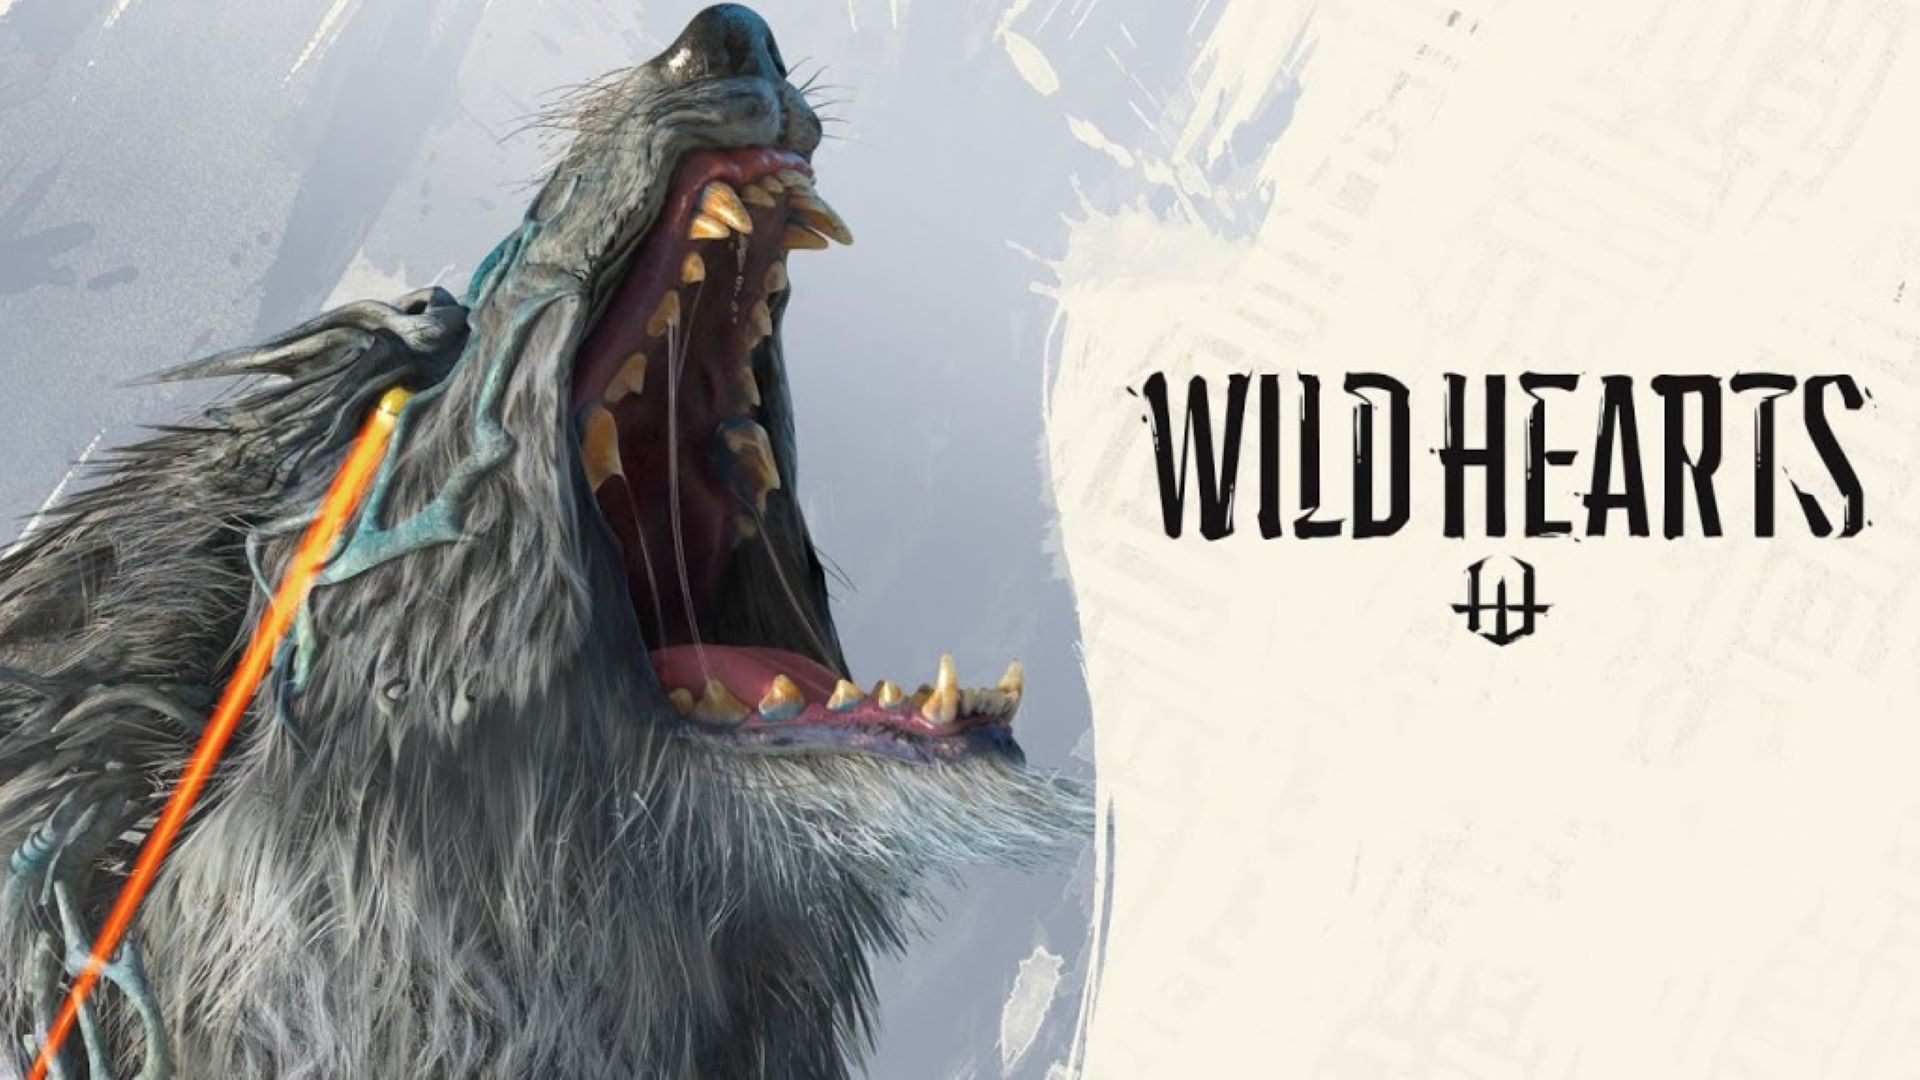 WILD HEARTS™ Revenue and Sales Soar During First Month of Release